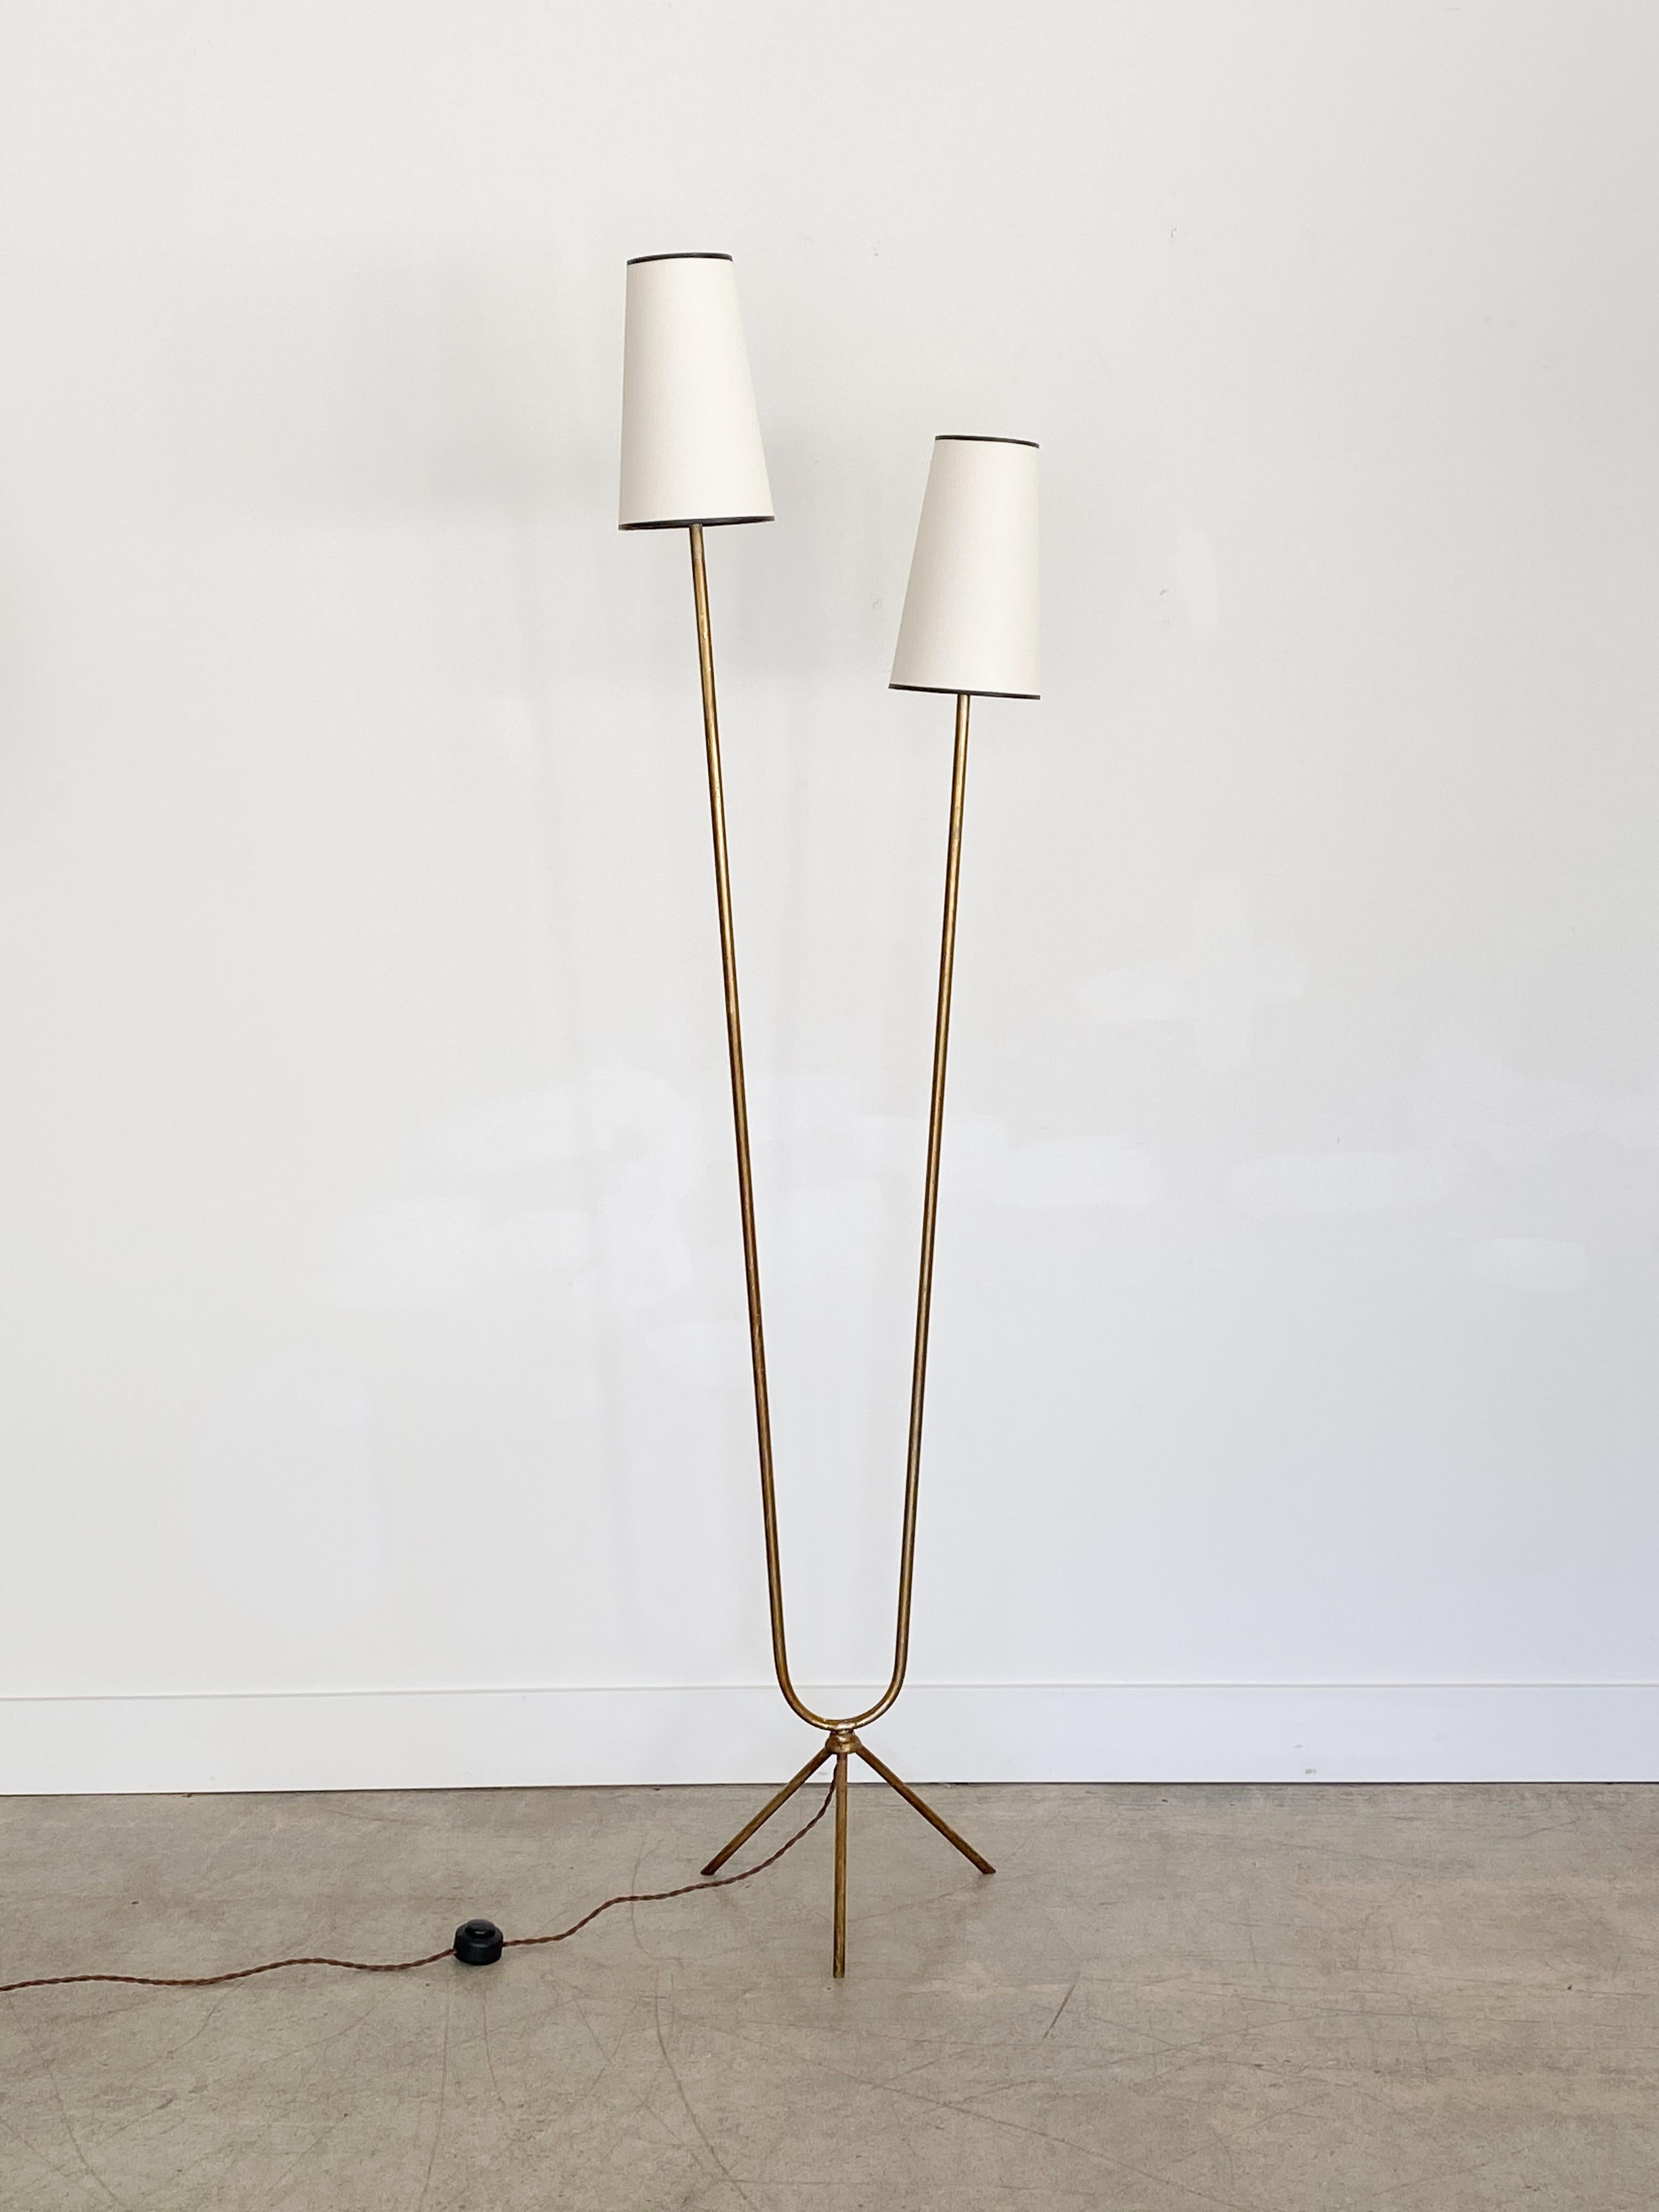 Vintage 1950s brass floor lamp from Italy. Brass tripod base with U-shaped long brass stems each with single sockets. Newly re-wired and new paper shades. Original brass has great patina and age.